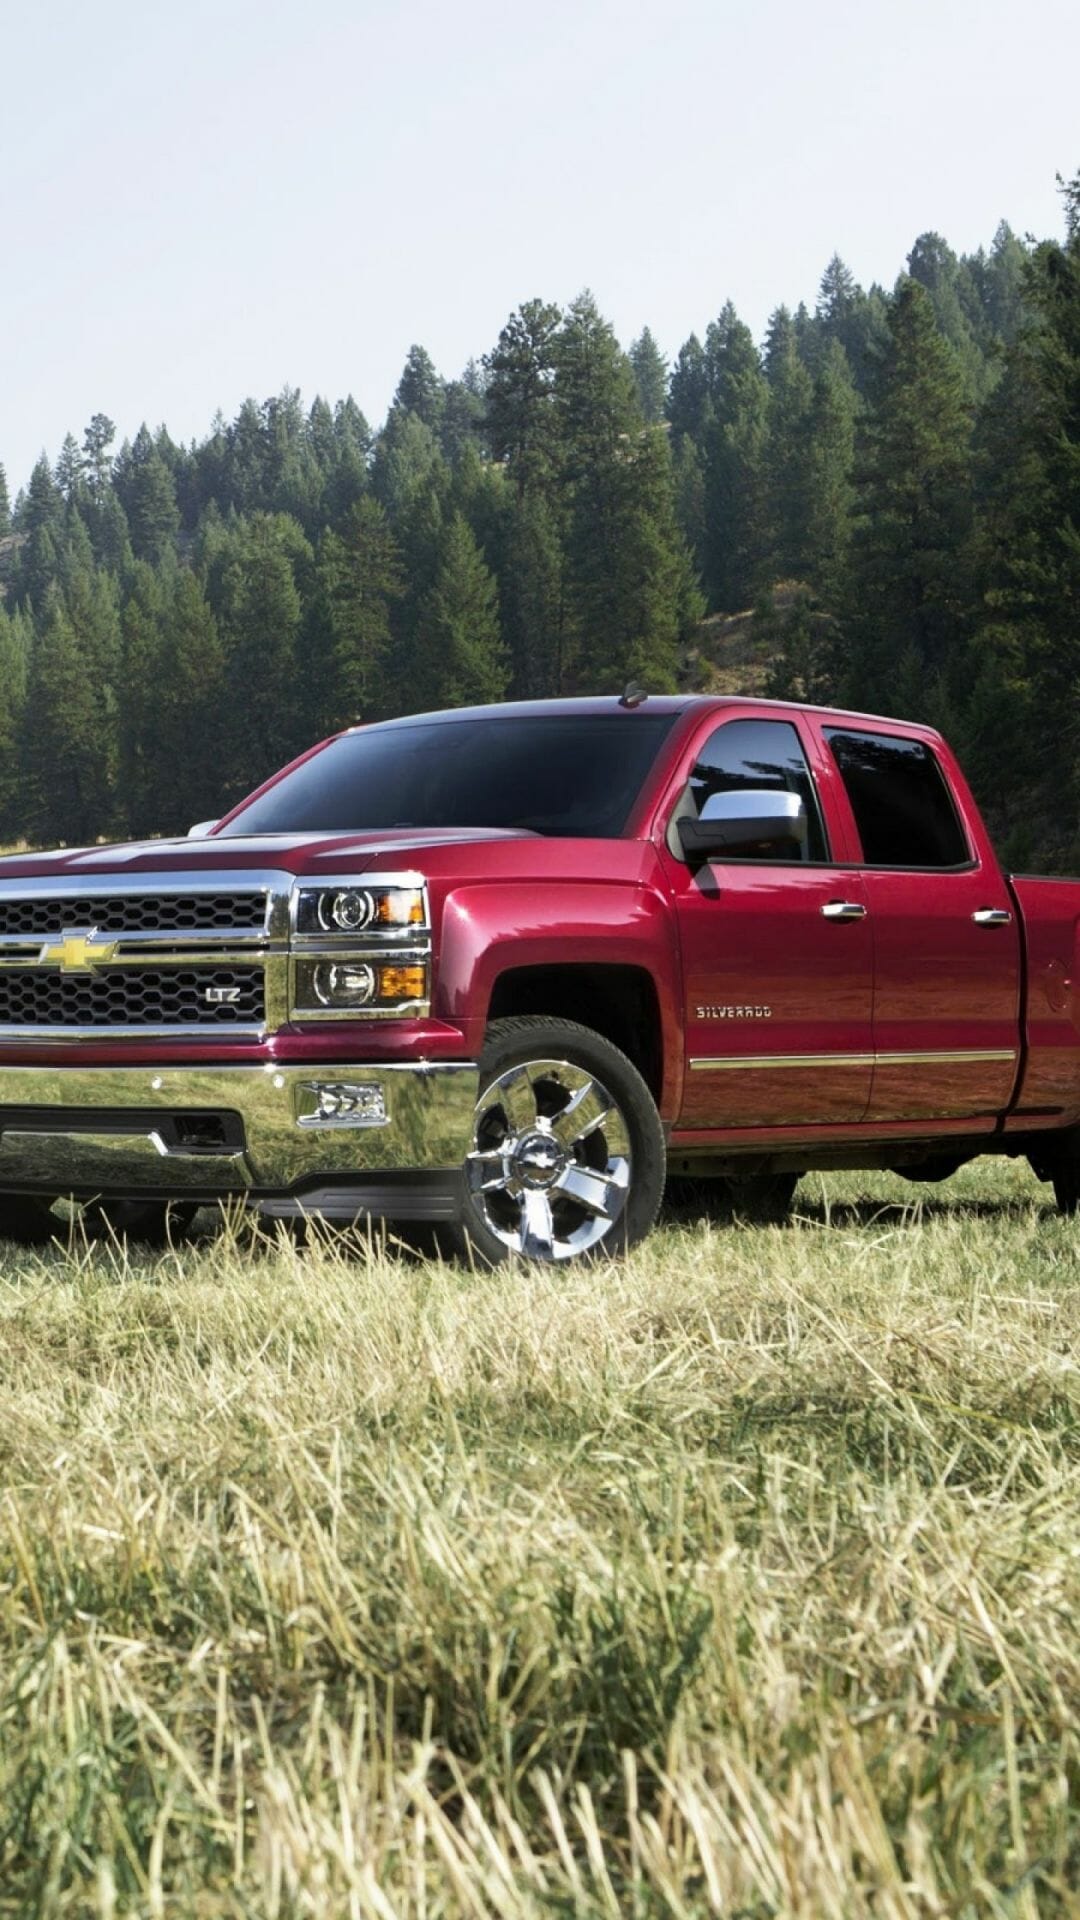 Chevy Silverado For Iphone Wallpapers